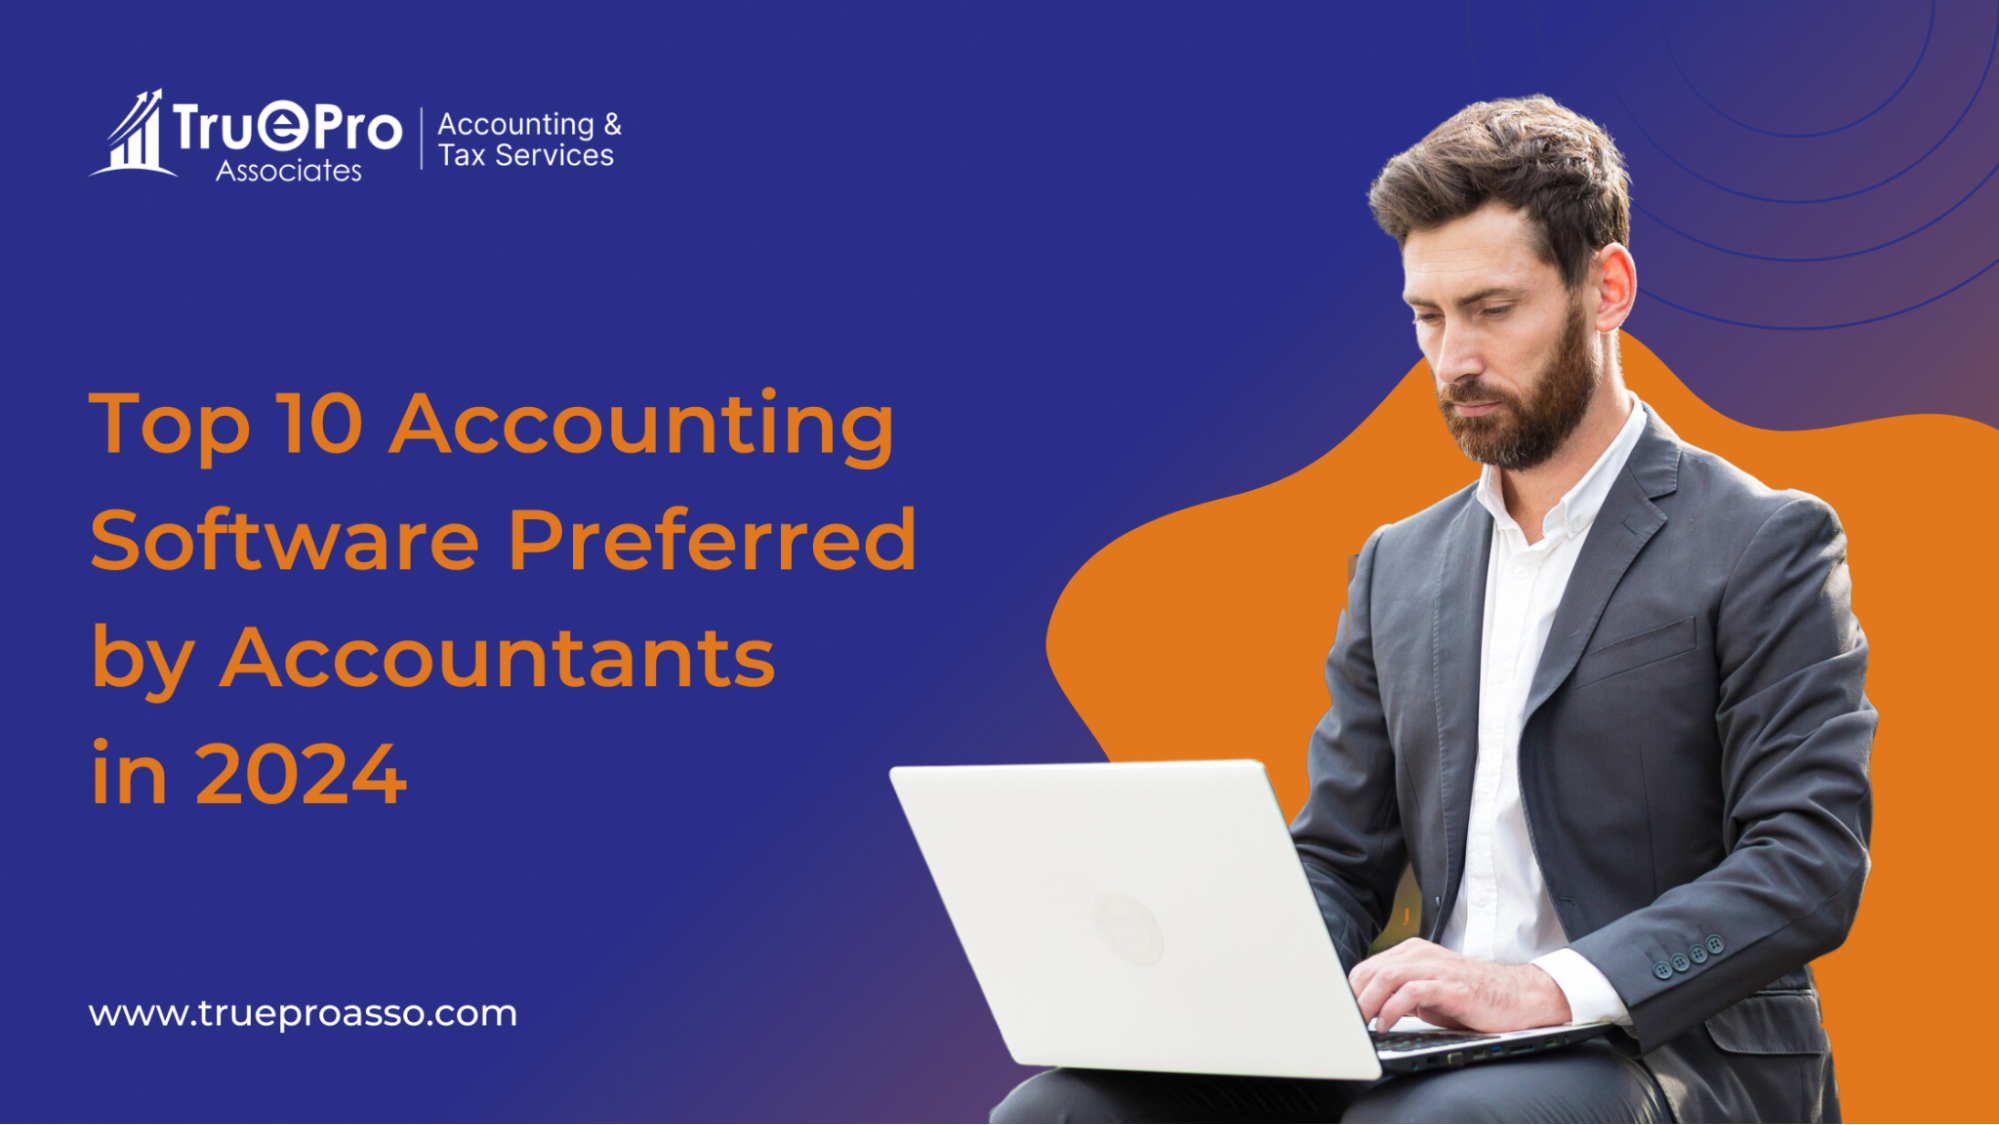 Top 10 Accounting Software Preferred by Accountants in 2024